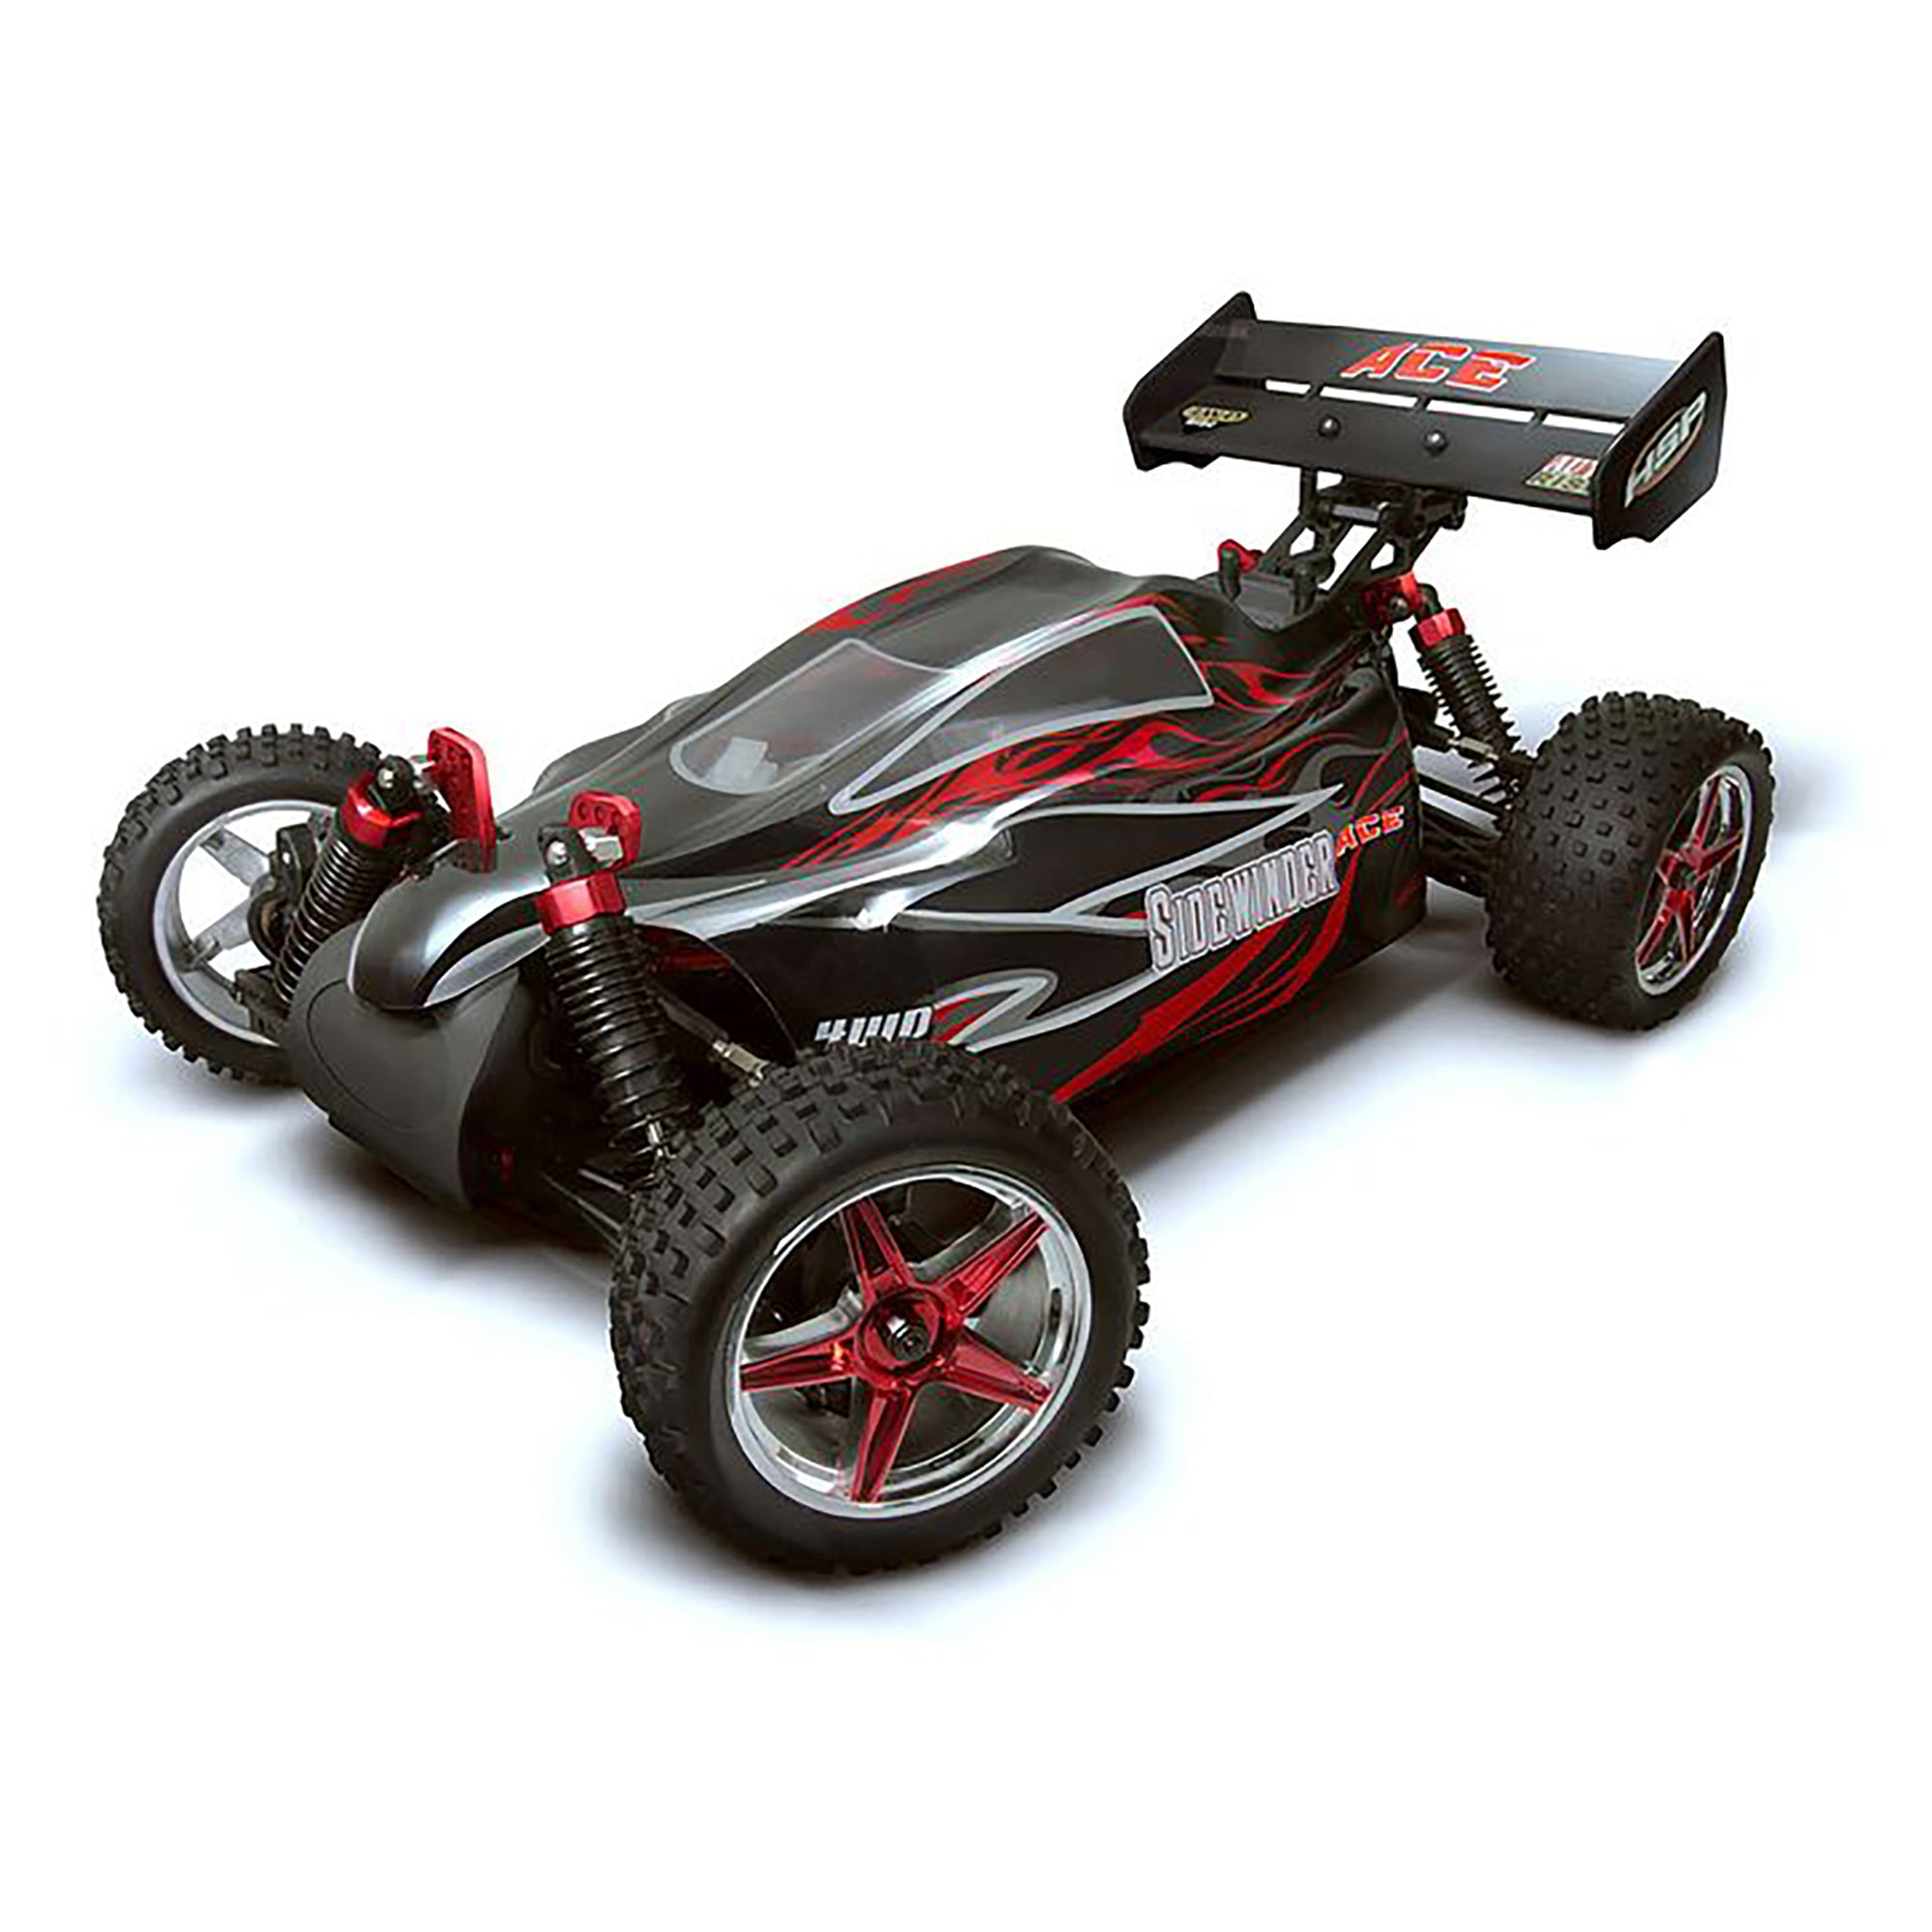 HSP Racing ACE Sidewinder 2.4GHz Brushless 4WD Off Road RTR 1/10 Scale PRO RC Buggy